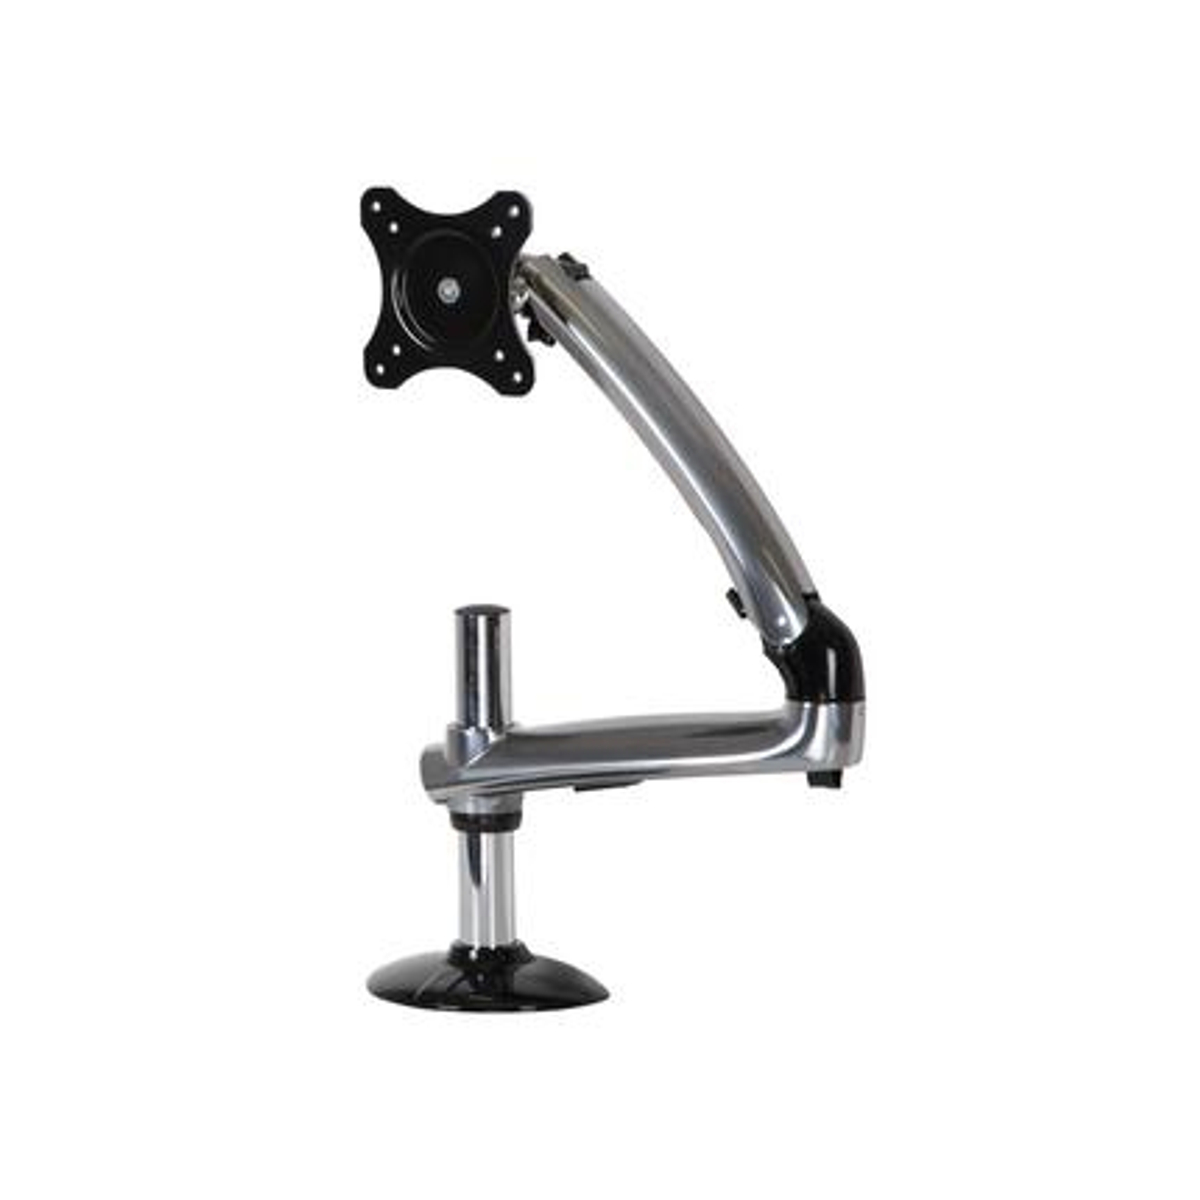 LCT620A Monitor Arm Mount Clamp